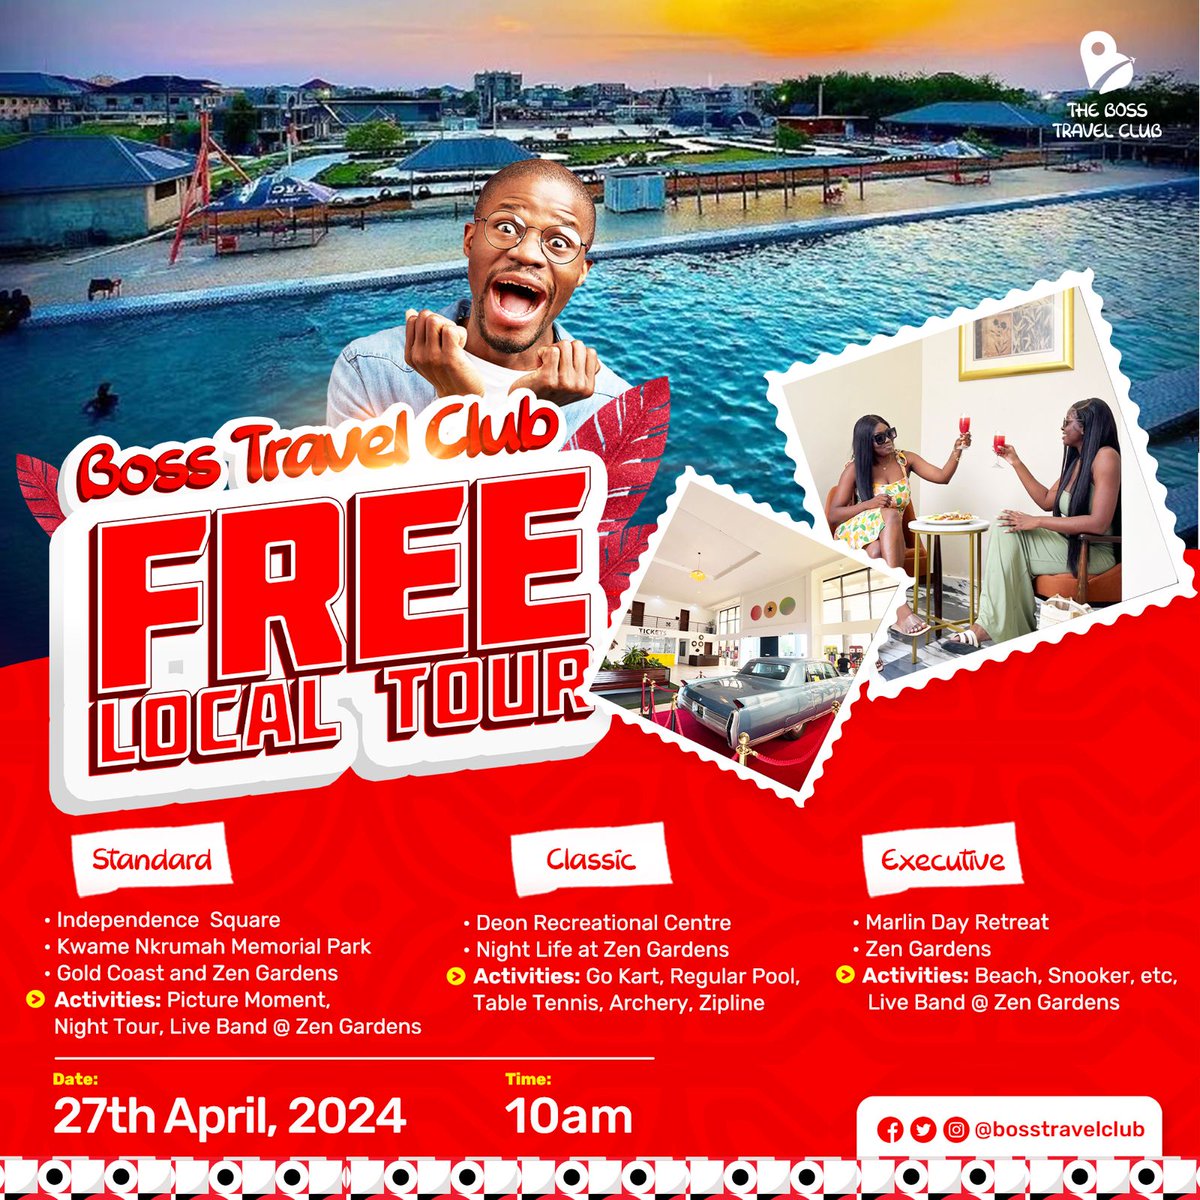 🎉🎉The next upcoming Boss Travel Club free tour is happening live this Saturday, April 27th, 2024🎉🎉

If you haven't signed up yet, this is the time to do so!
Don't miss out on the next free trip!

#thebossapp #thebosstravelclub #tbcghana  #adansitravels #freetrip  #travelclub